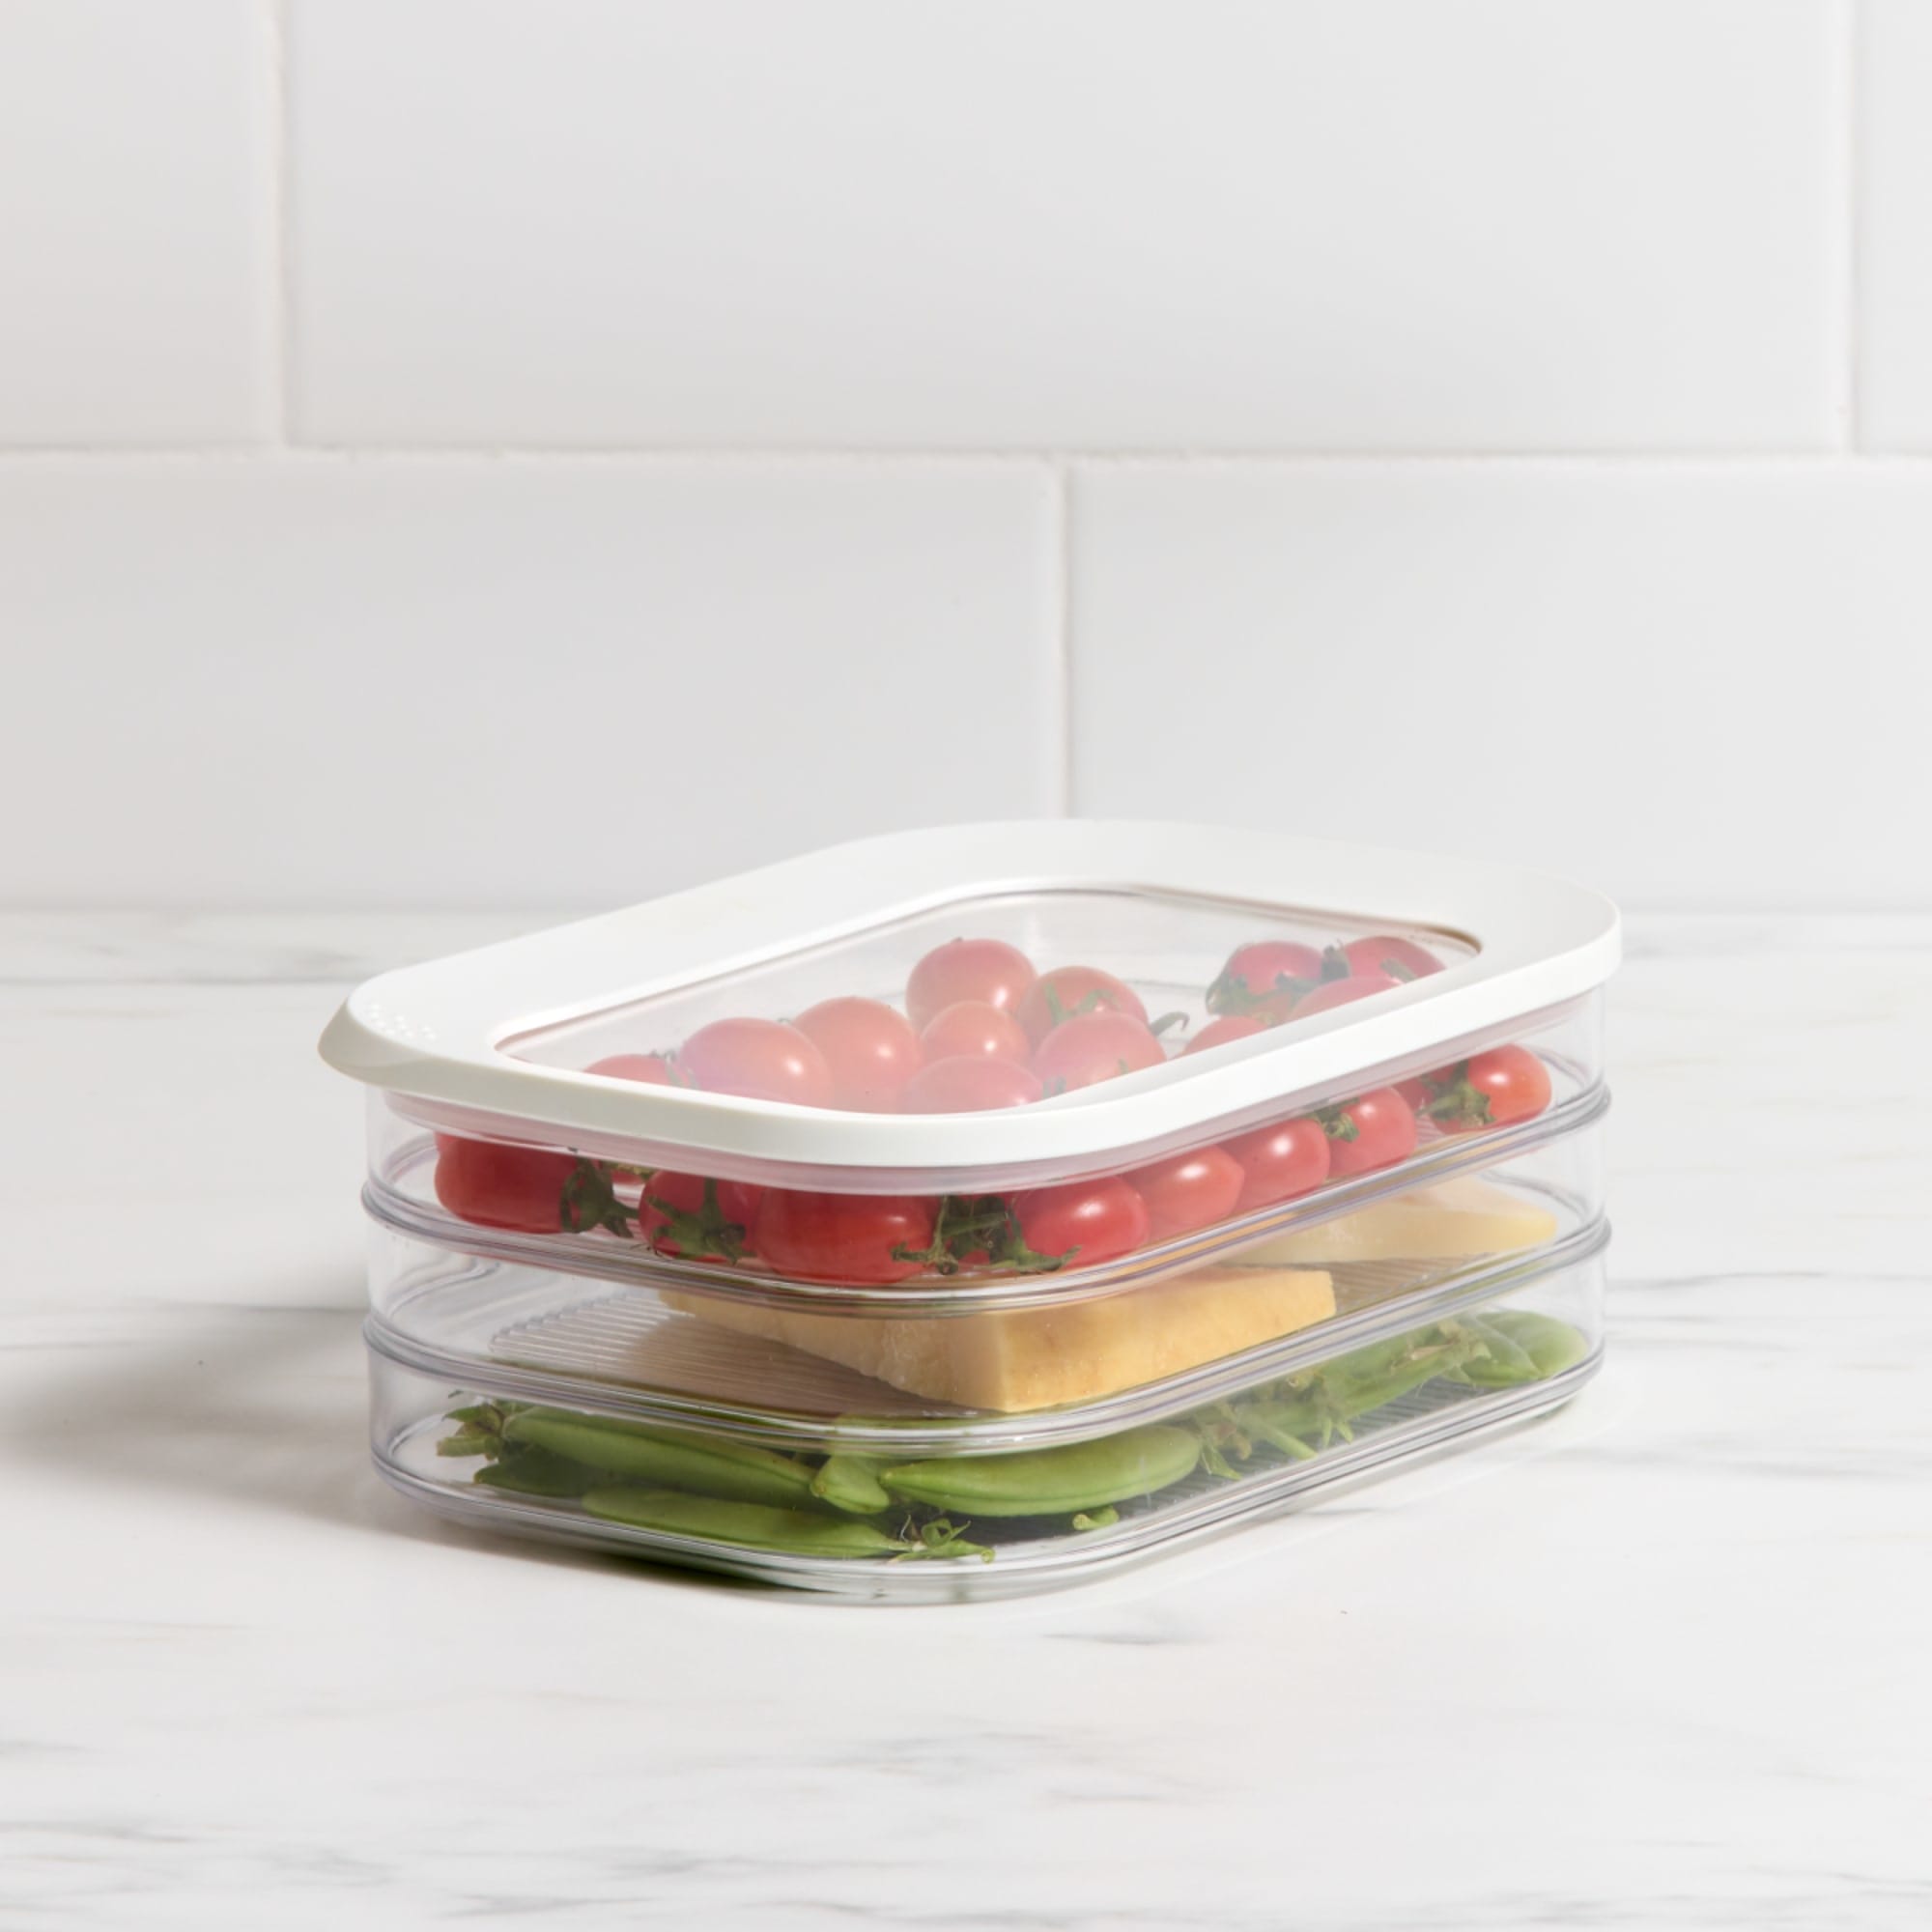 https://res.cloudinary.com/kitchenwarehouse/image/upload/c_fill,g_face,w_1250/f_auto/t_PDP_2000x2000/Kitchen%20Warehouse%20Images%20/Kitchen-Pro-Fresh-Stackable-Container-Set-of-3-HERO_2.jpg?imagetype=pdp_full